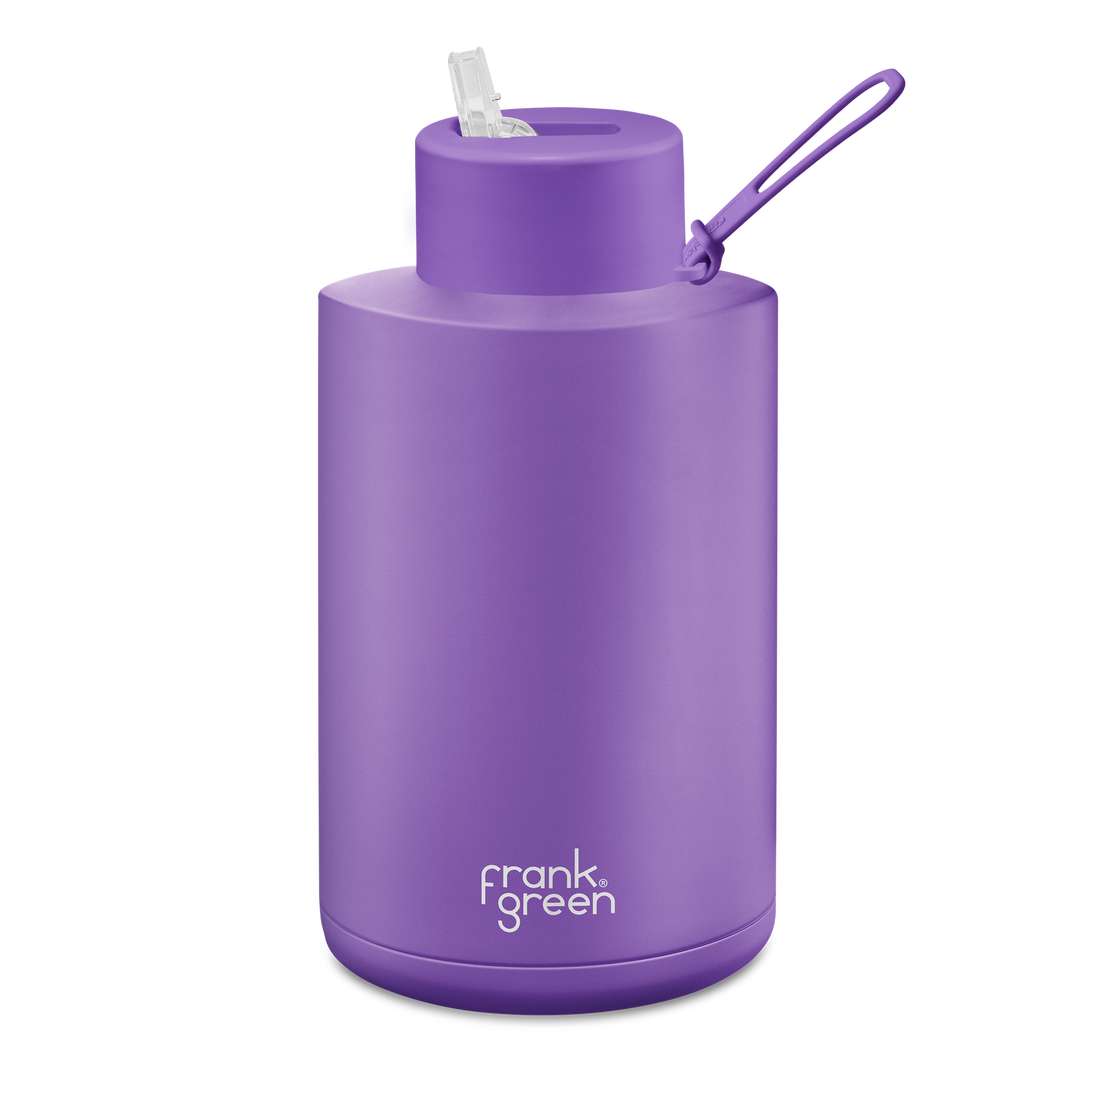 Frank Green - LIMITED EDITION 2 Litre Stainless Steel Ceramic Reusable Bottle in Cosmic Purple